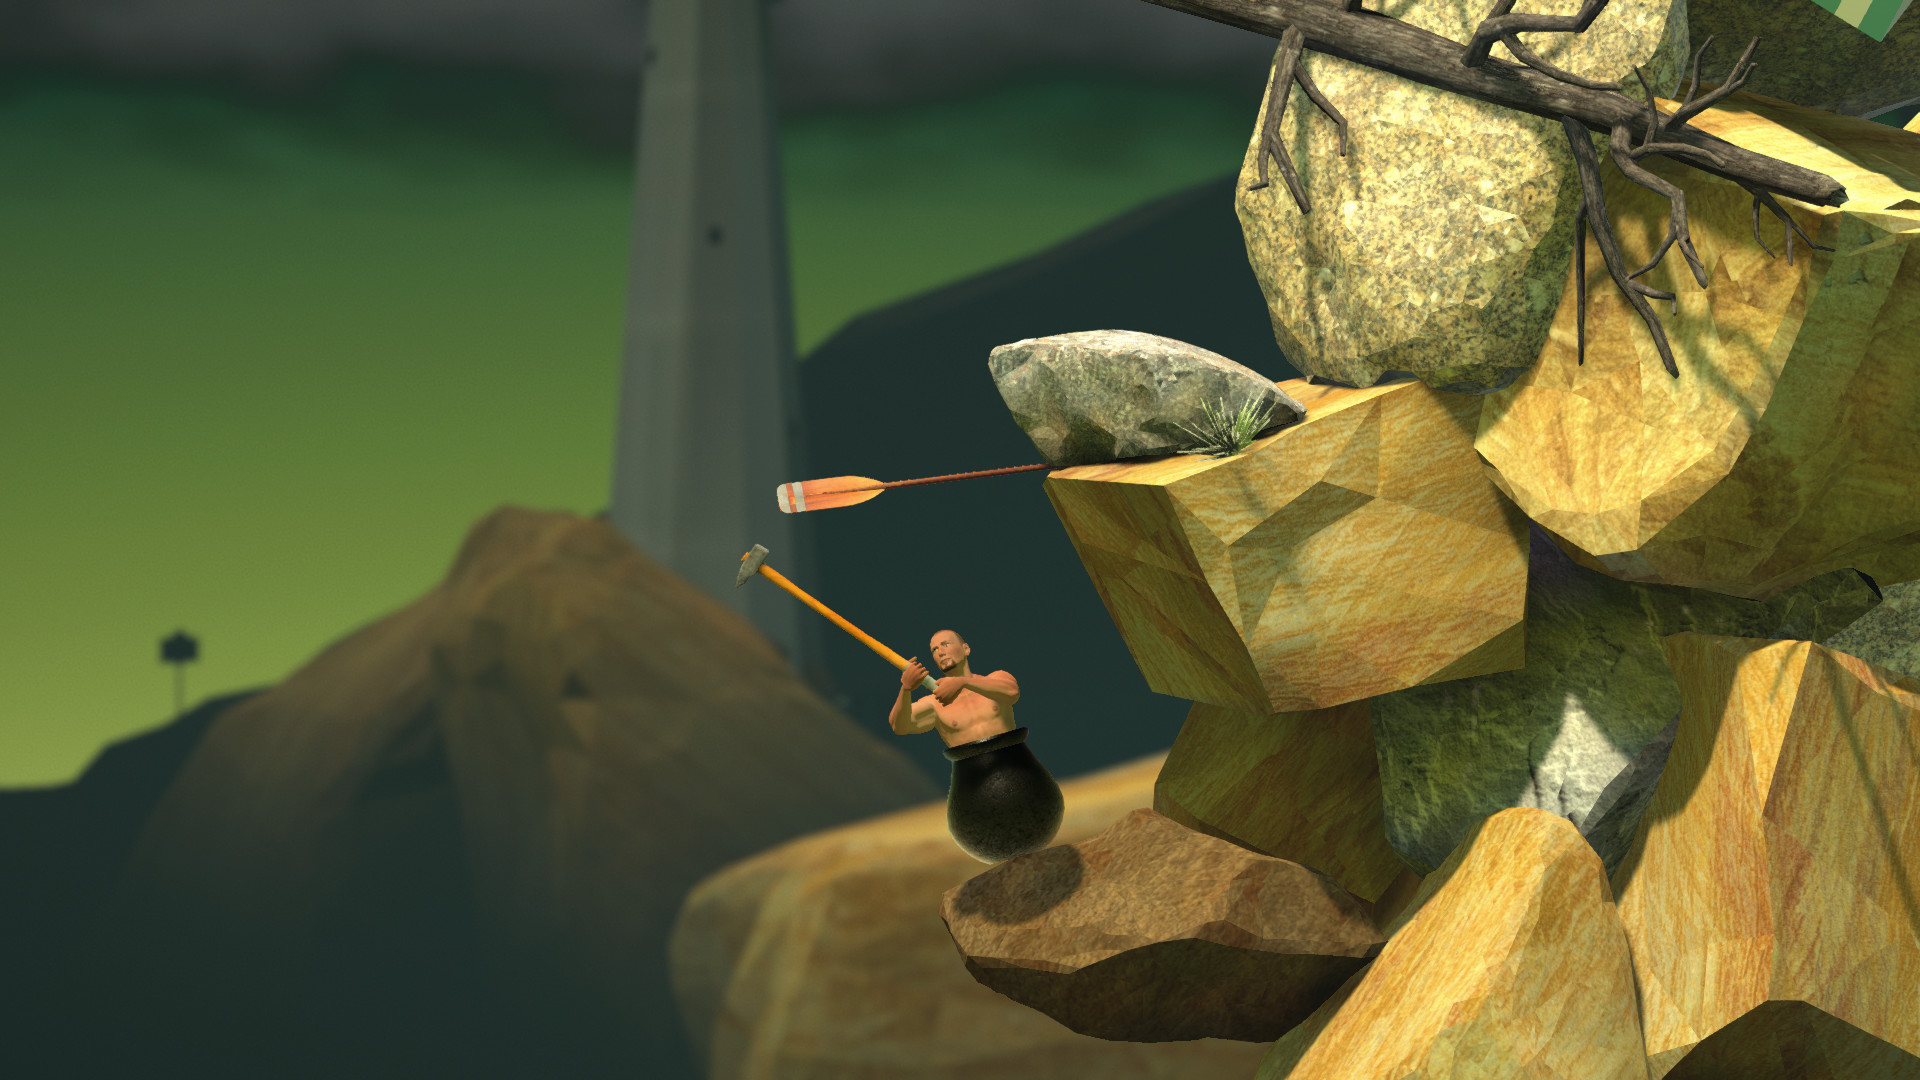 Getting Over It with Bennett Foddy Full Mobile Game Free Download